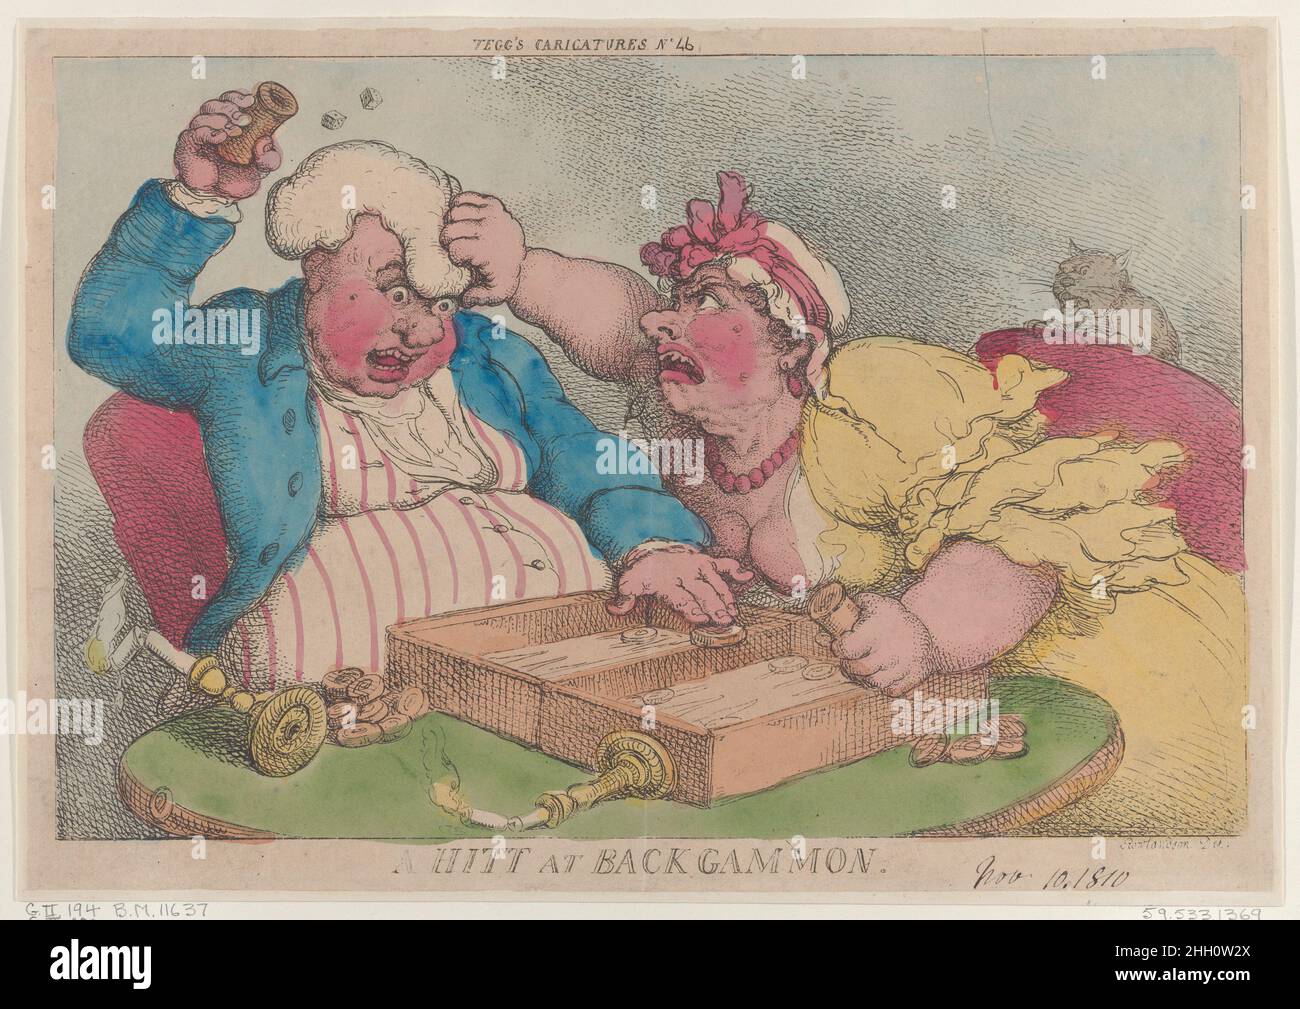 A Hitt at Backgammon November 9, 1810 Thomas Rowlandson A man and woman play backgammon. The woman at right is frantic with rage, and leans towards the man to seize his wig. Two candlesticks are overturned on the table and a cat meows at the back of her chair.. A Hitt at Backgammon. Thomas Rowlandson (British, London 1757–1827 London). November 9, 1810. Hand-colored etching. Thomas Tegg (British, 1776–1846). Prints Stock Photo